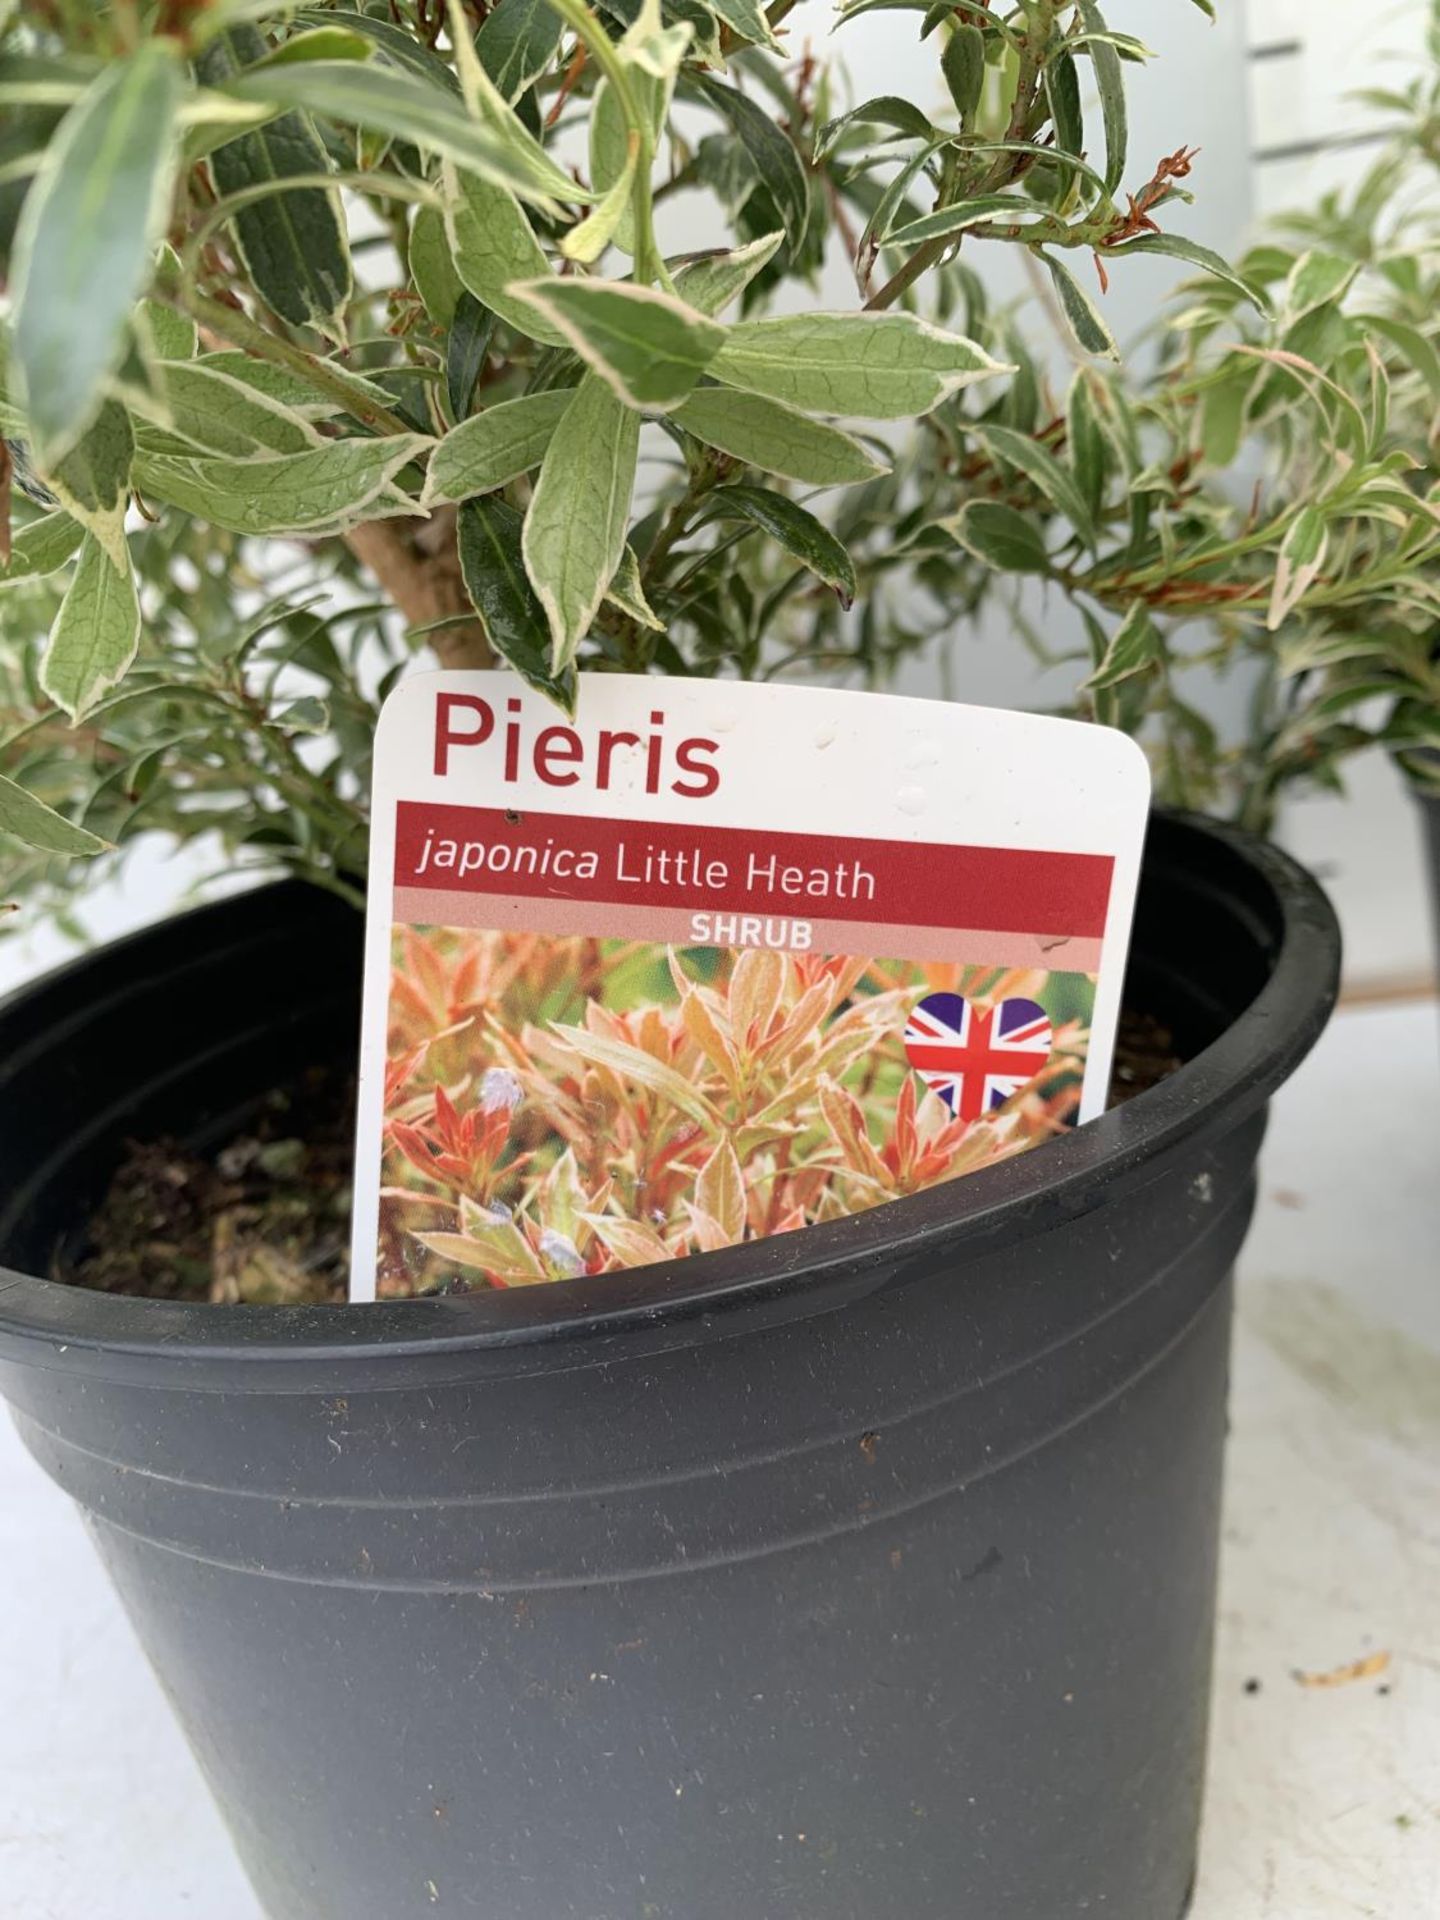 FOUR PIERIS LITTLE HEATH 45CM TALL IN 2 LTR POTS TO BE SOLD FOR THE FOUR PLUS VAT - Image 9 of 10